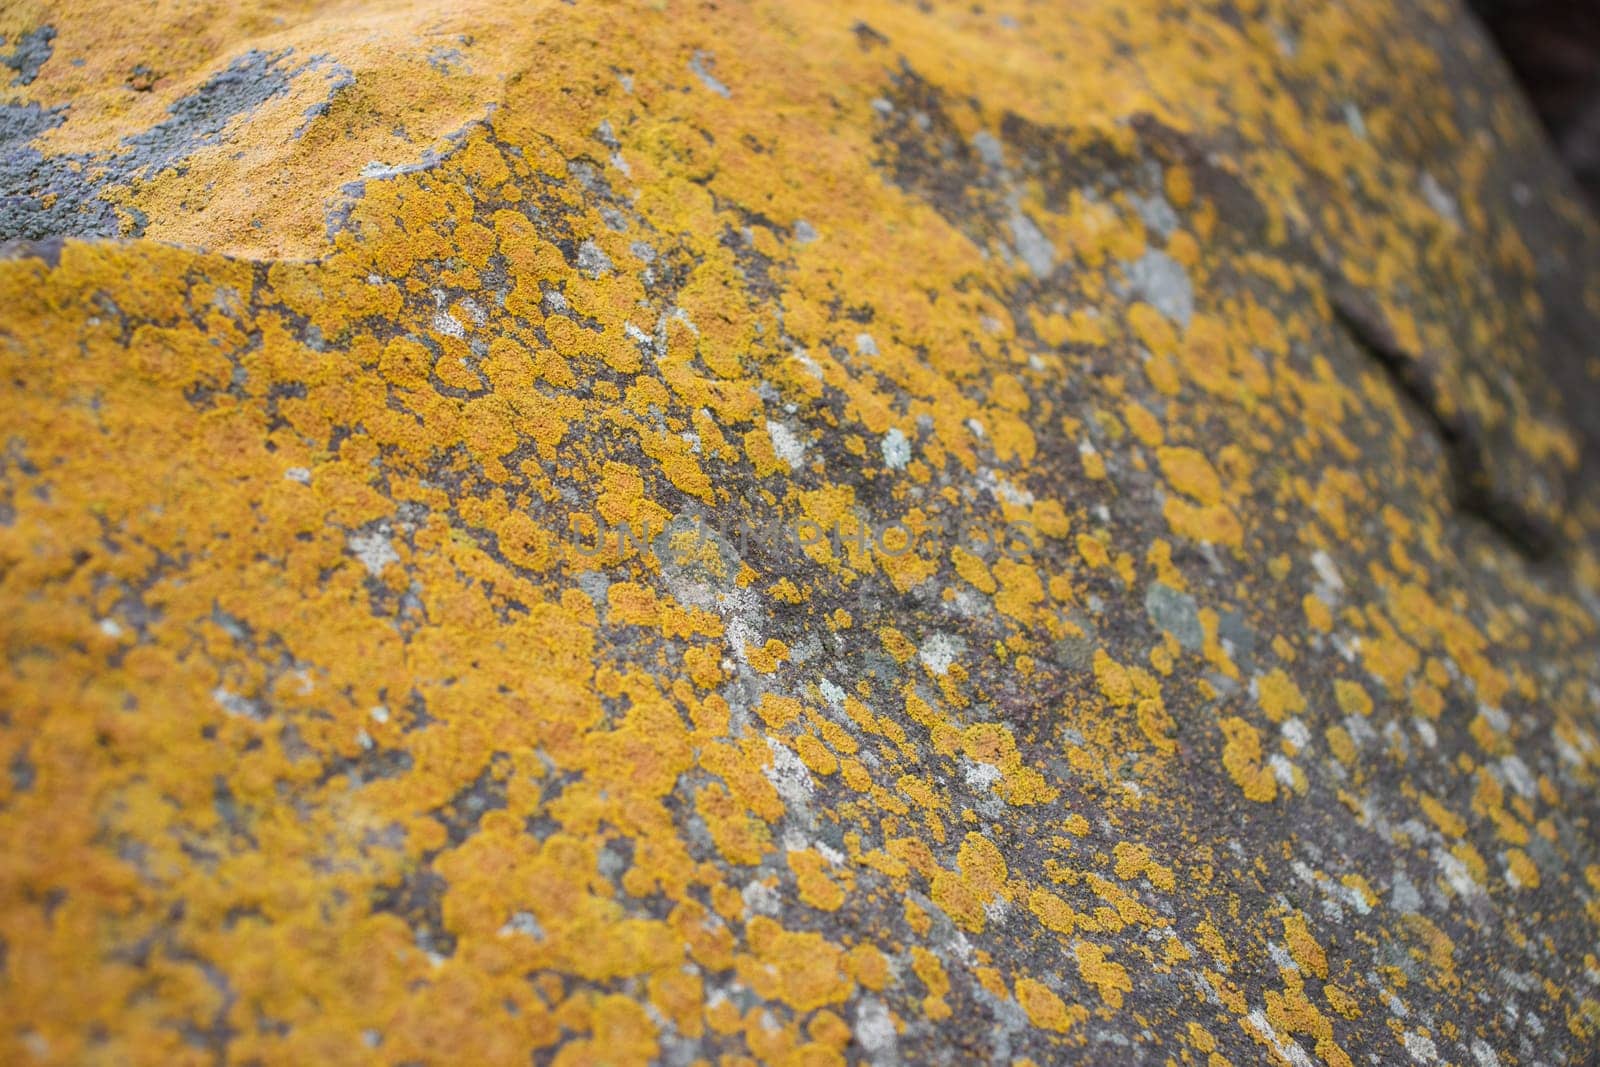 Close up yellow lichen cover the rough stone concept photo. Show with macro view. Rocks full of the moss texture in nature for wallpaper.